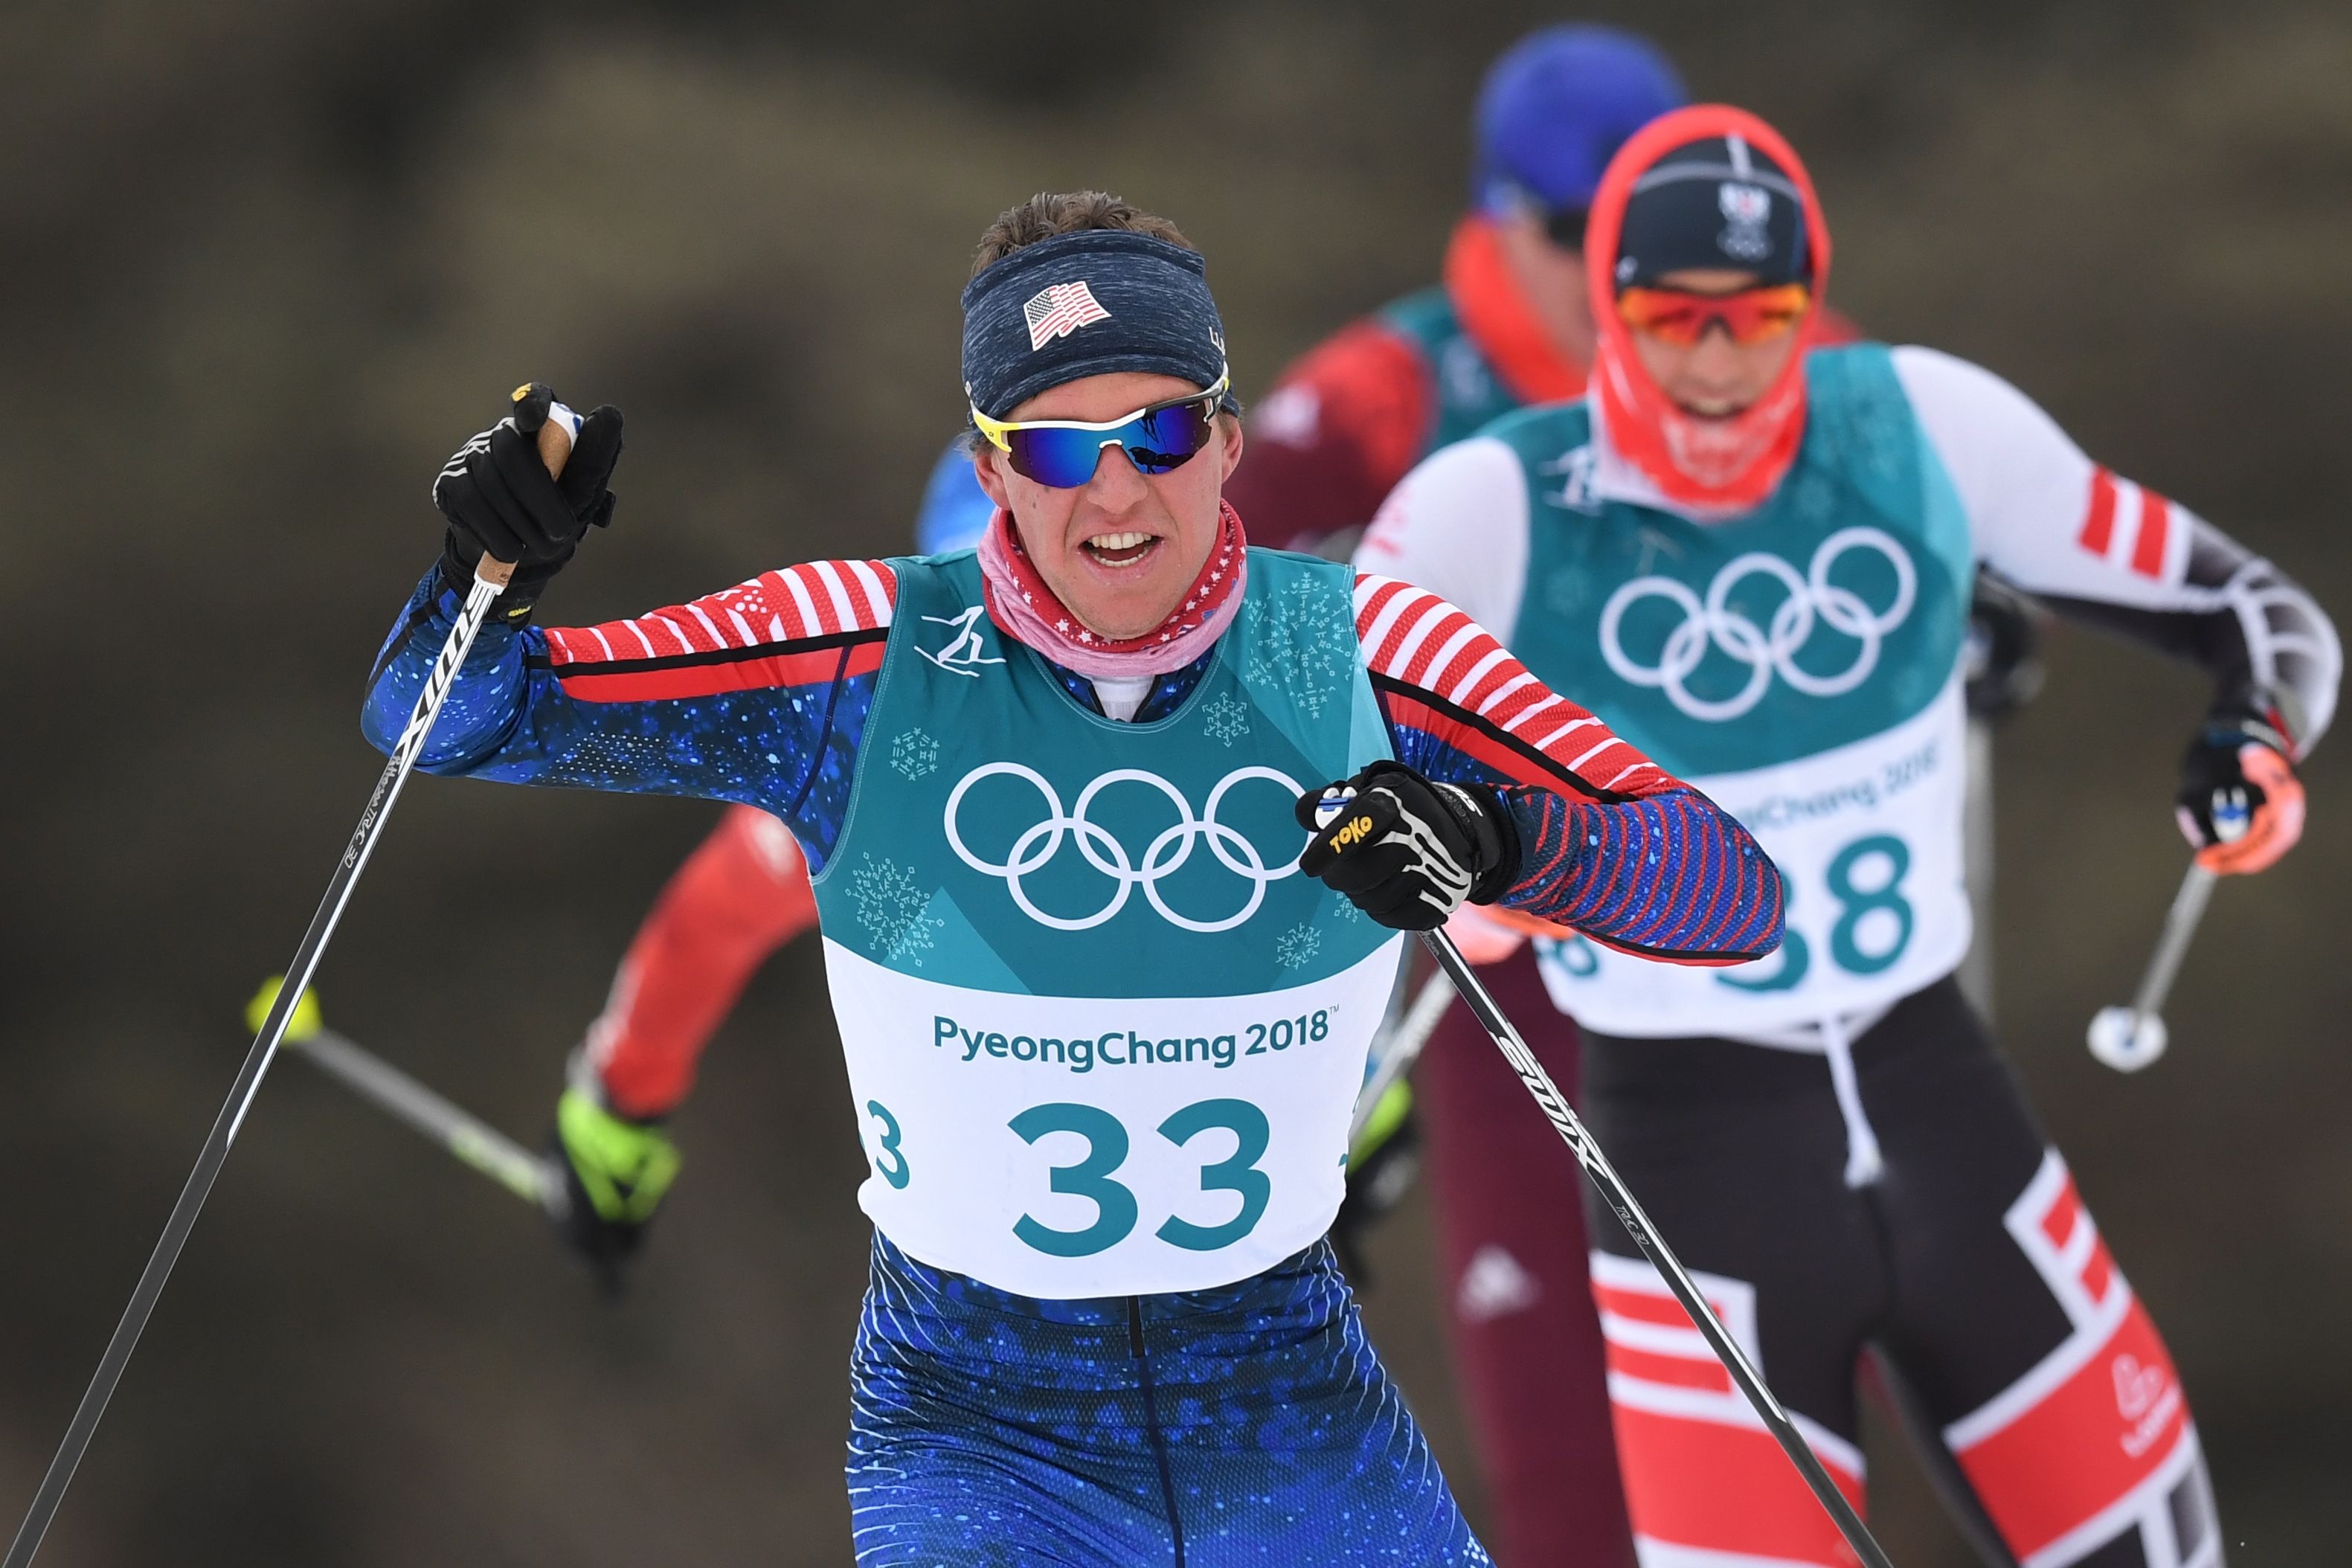 Scott Patterson competes in the men's skiathlon at the Alpensia cross country ski center Sunday. (Getty Images/AFP - Franck Fife)